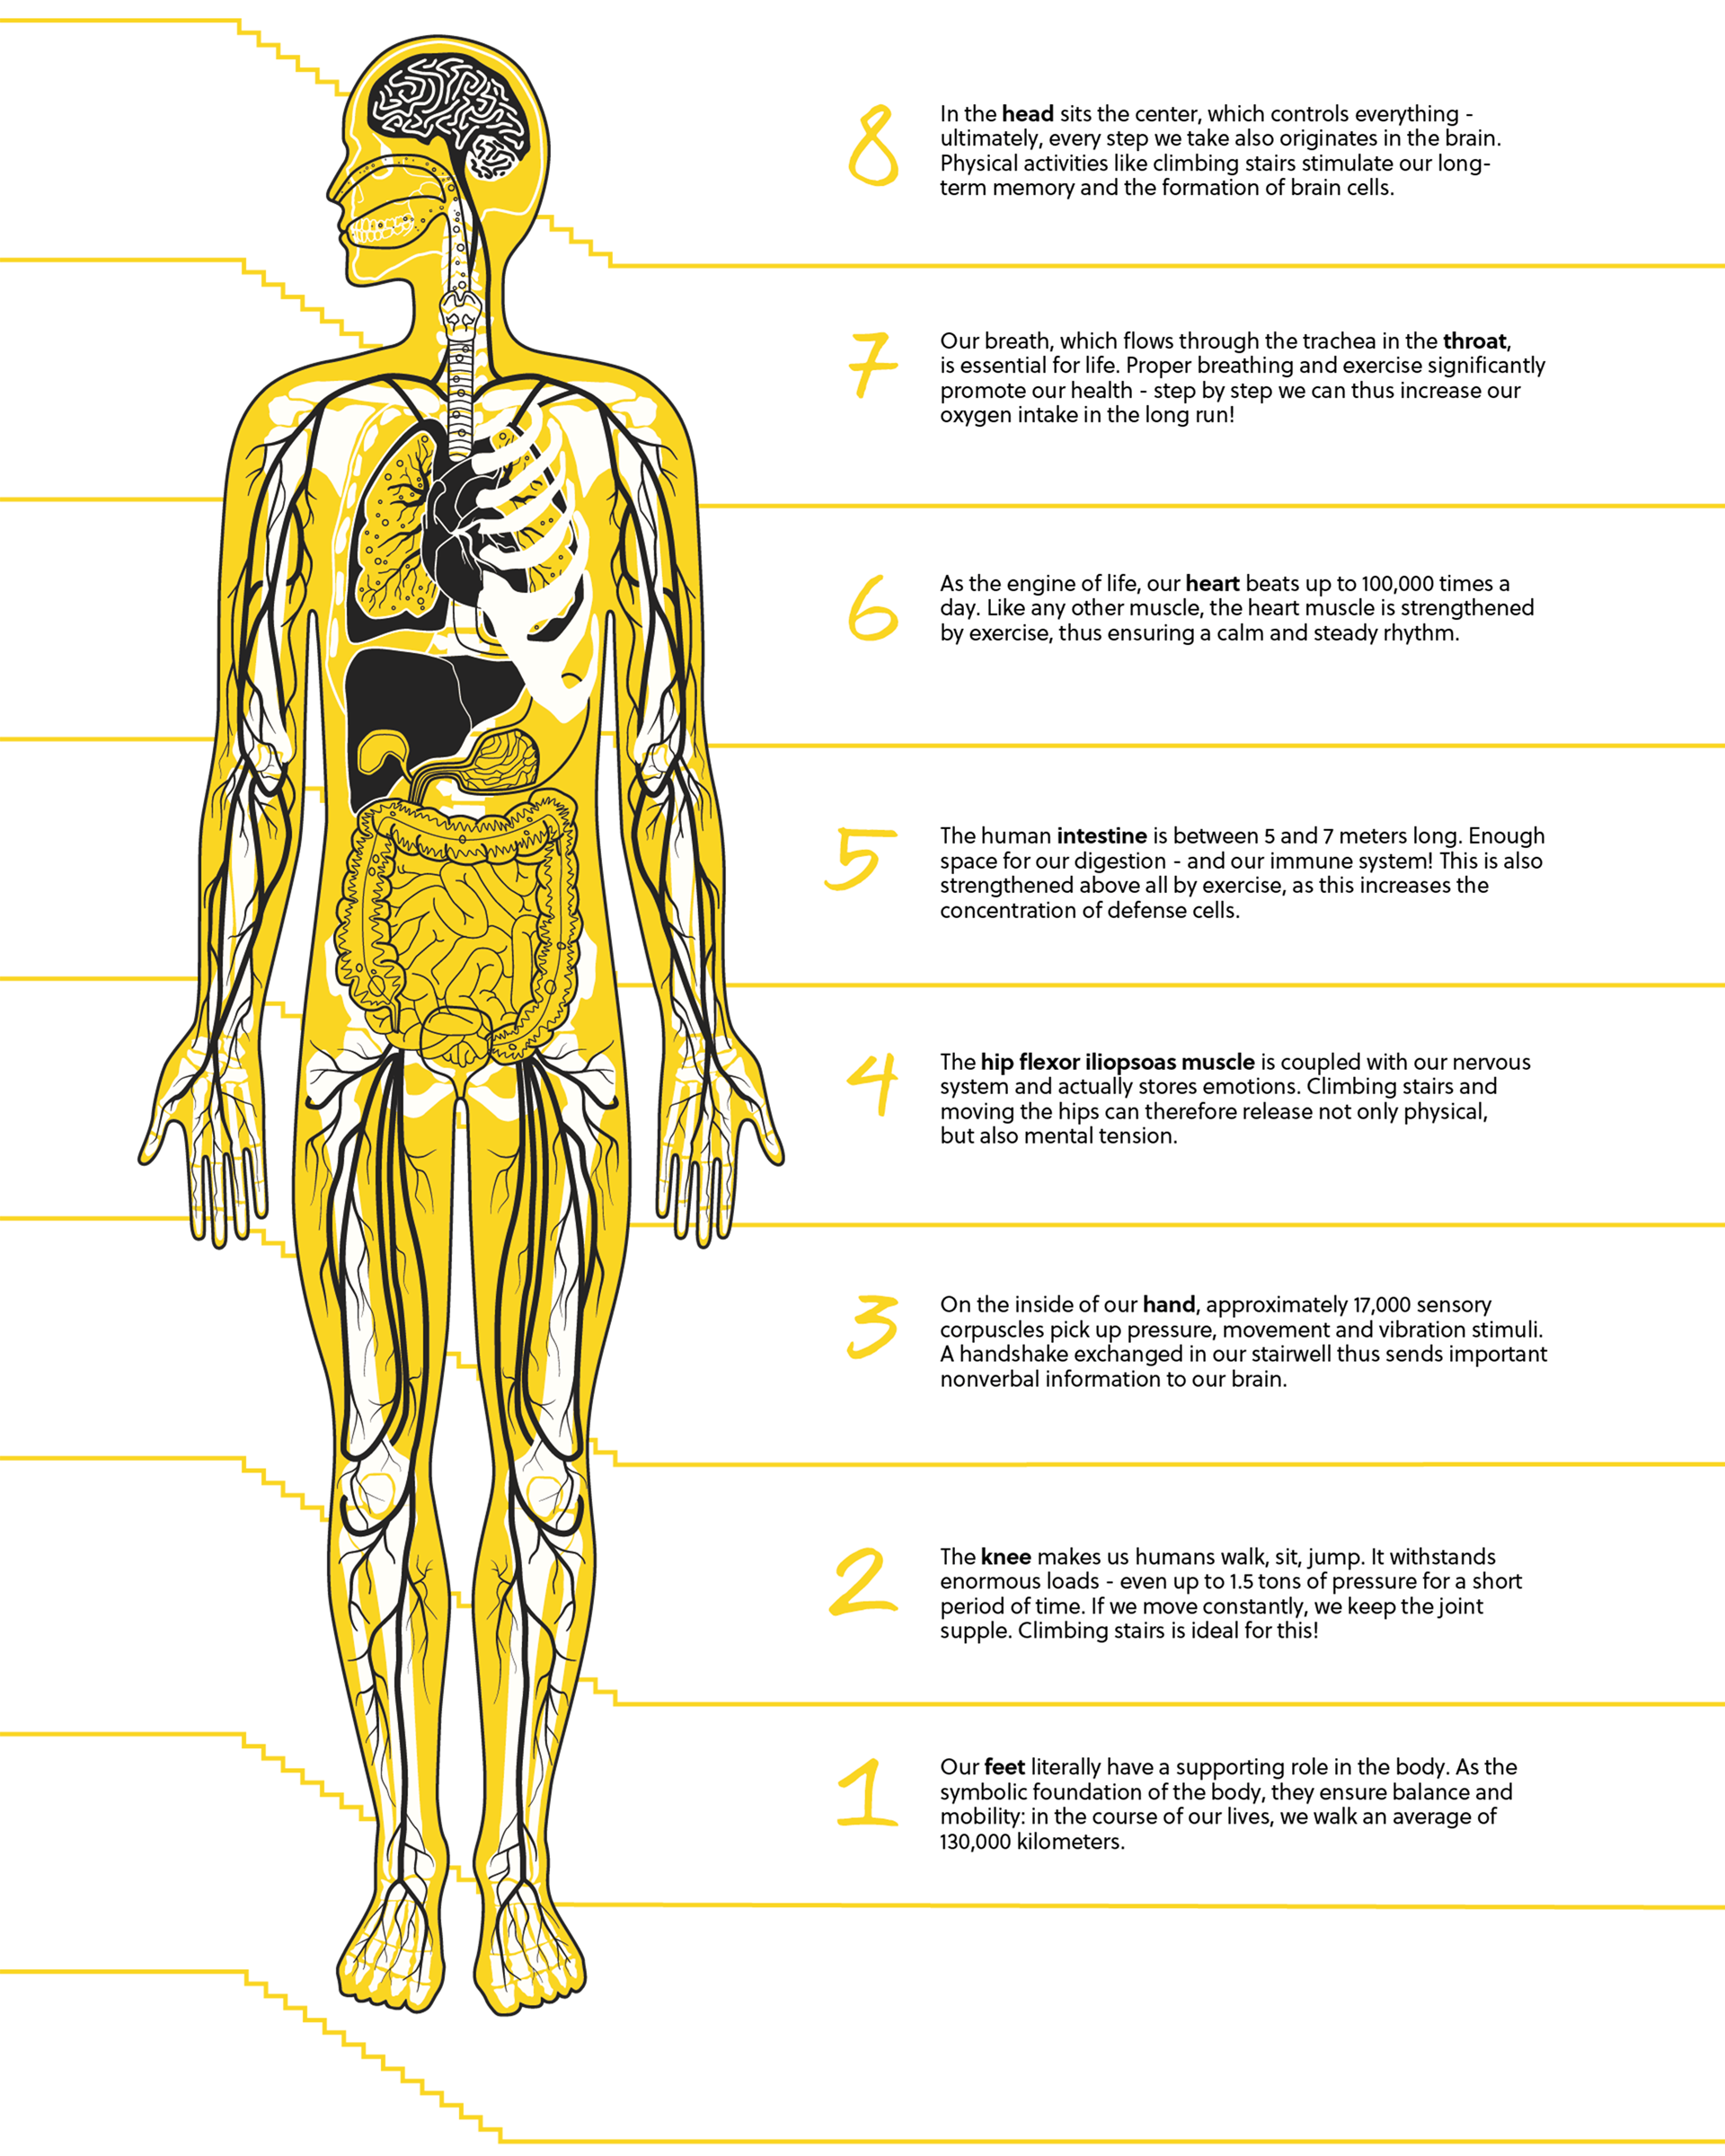 The whole illustrated figure of a human with the according texts indicating the influence of movement onto different body parts as overview